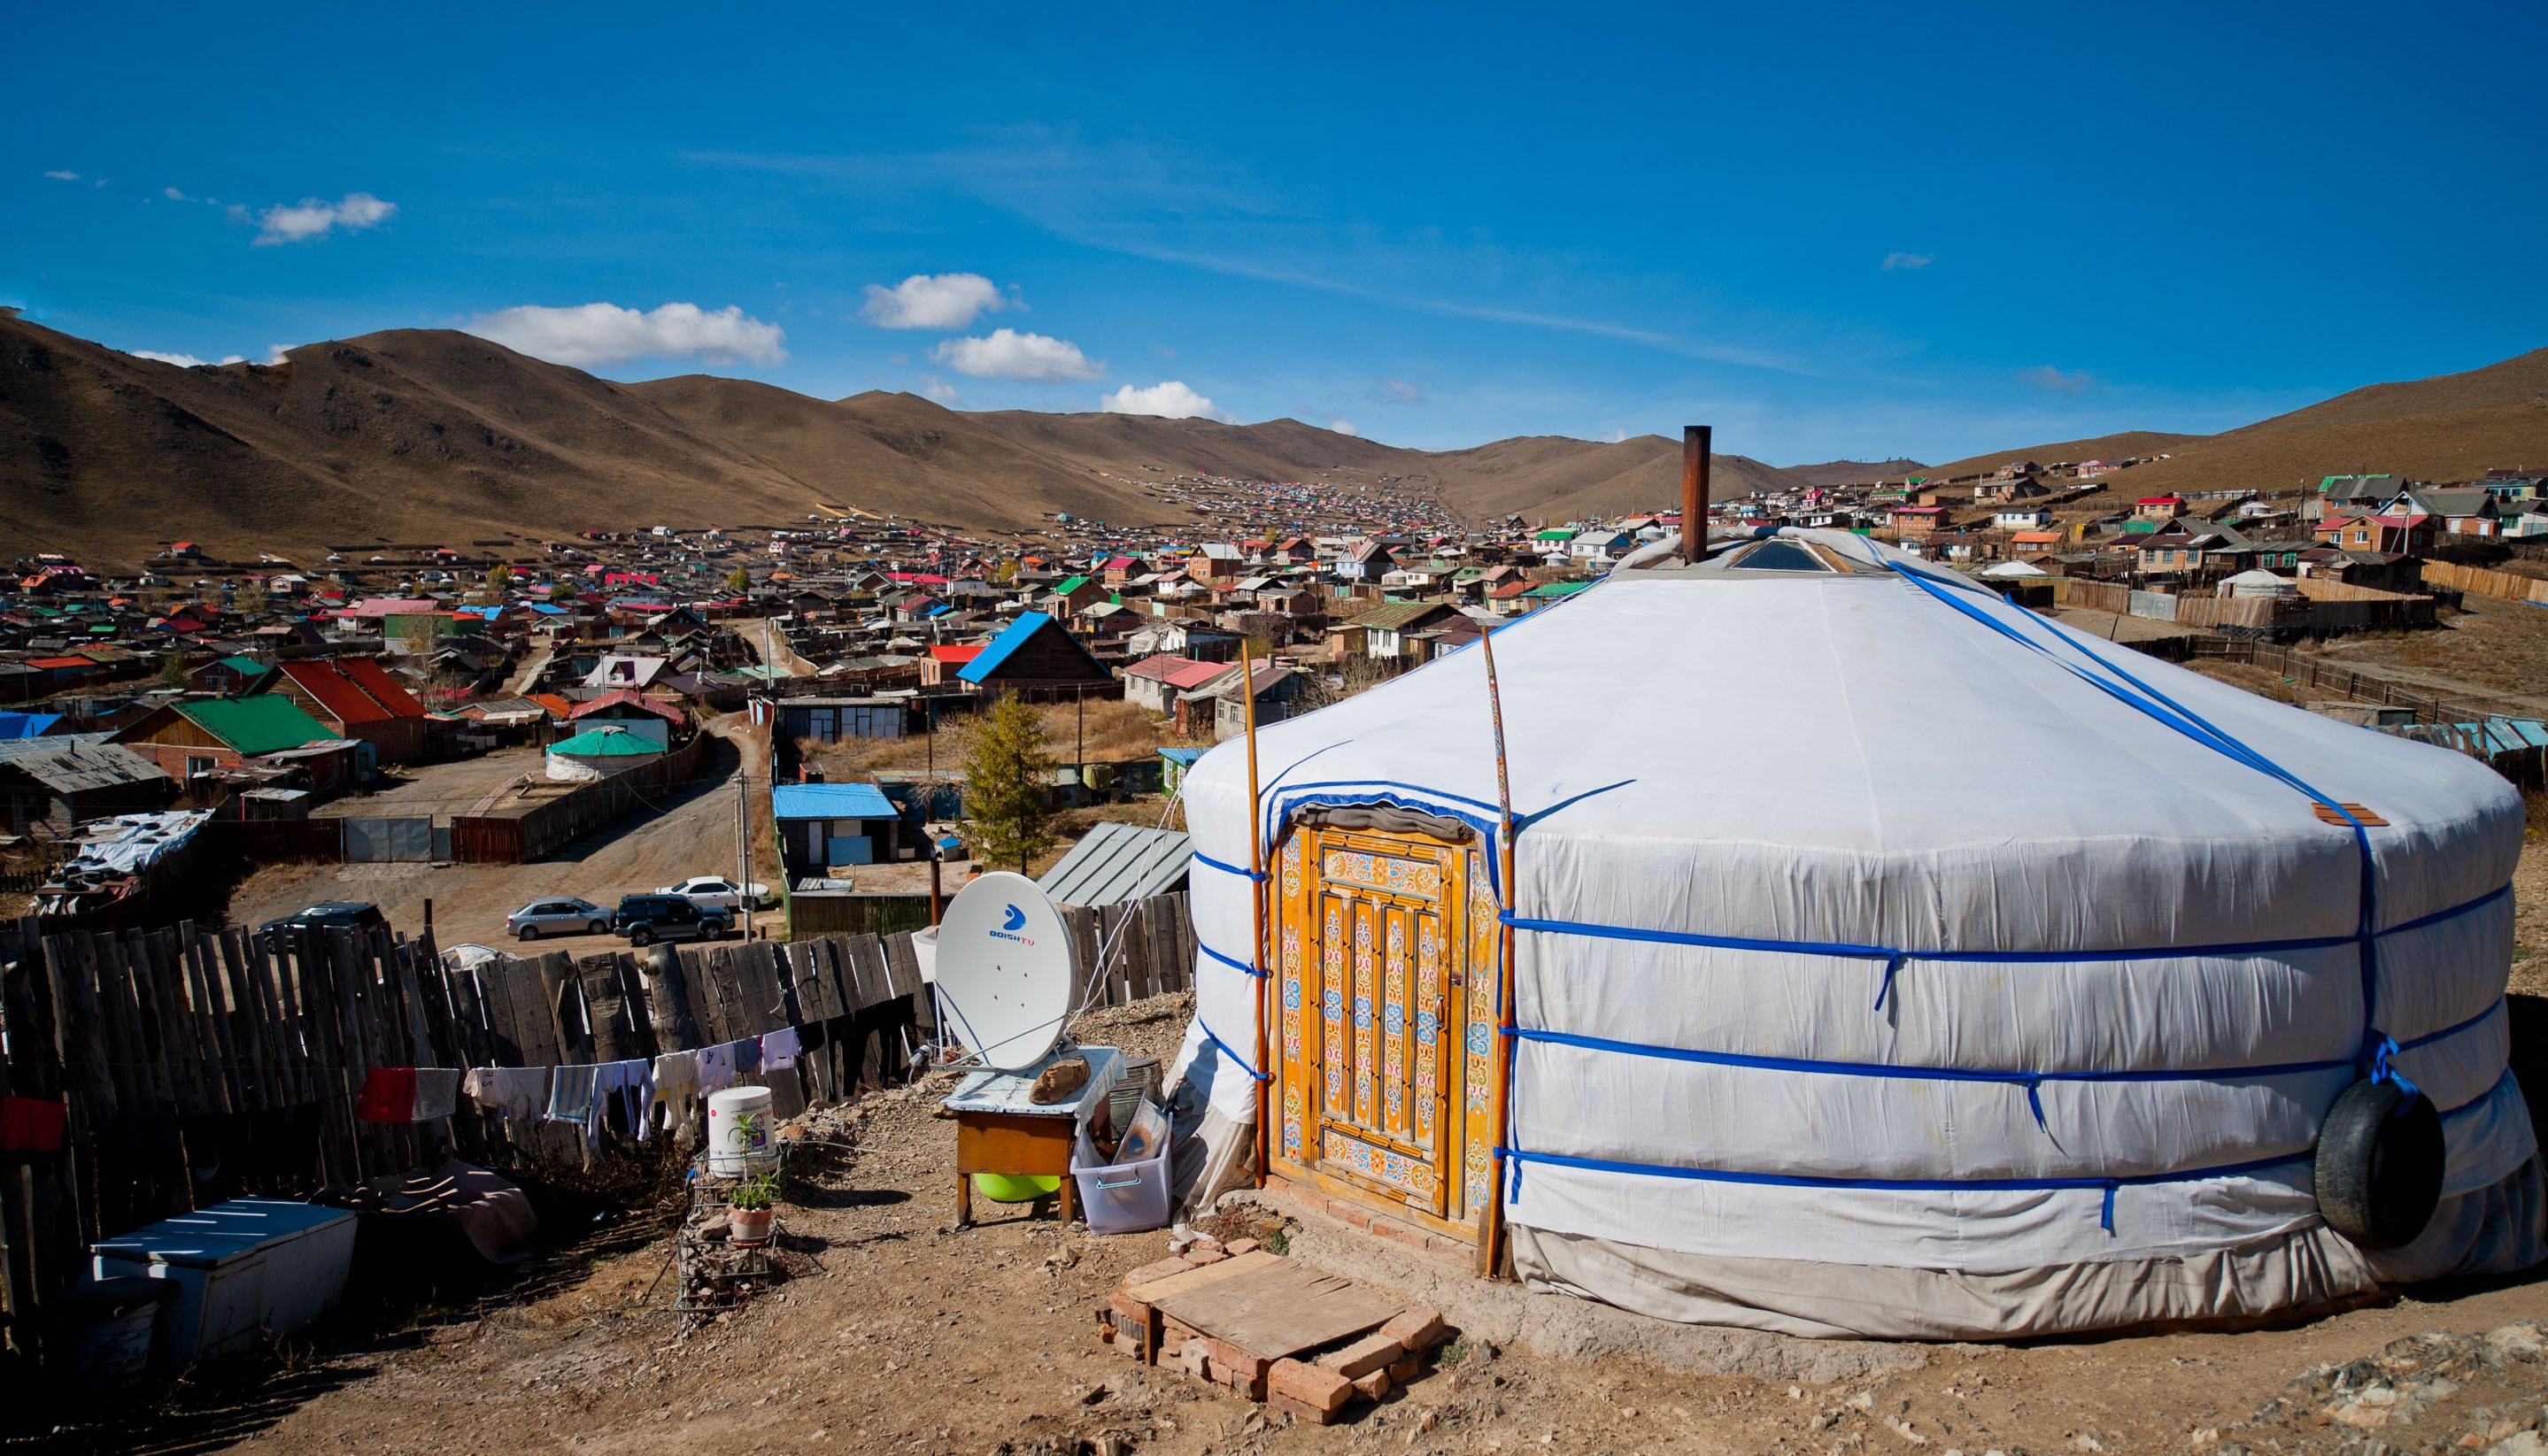 Read Community-Based Partnerships Lift Up Mongolia’s COVID-19-Affected People by Asian Development Bank